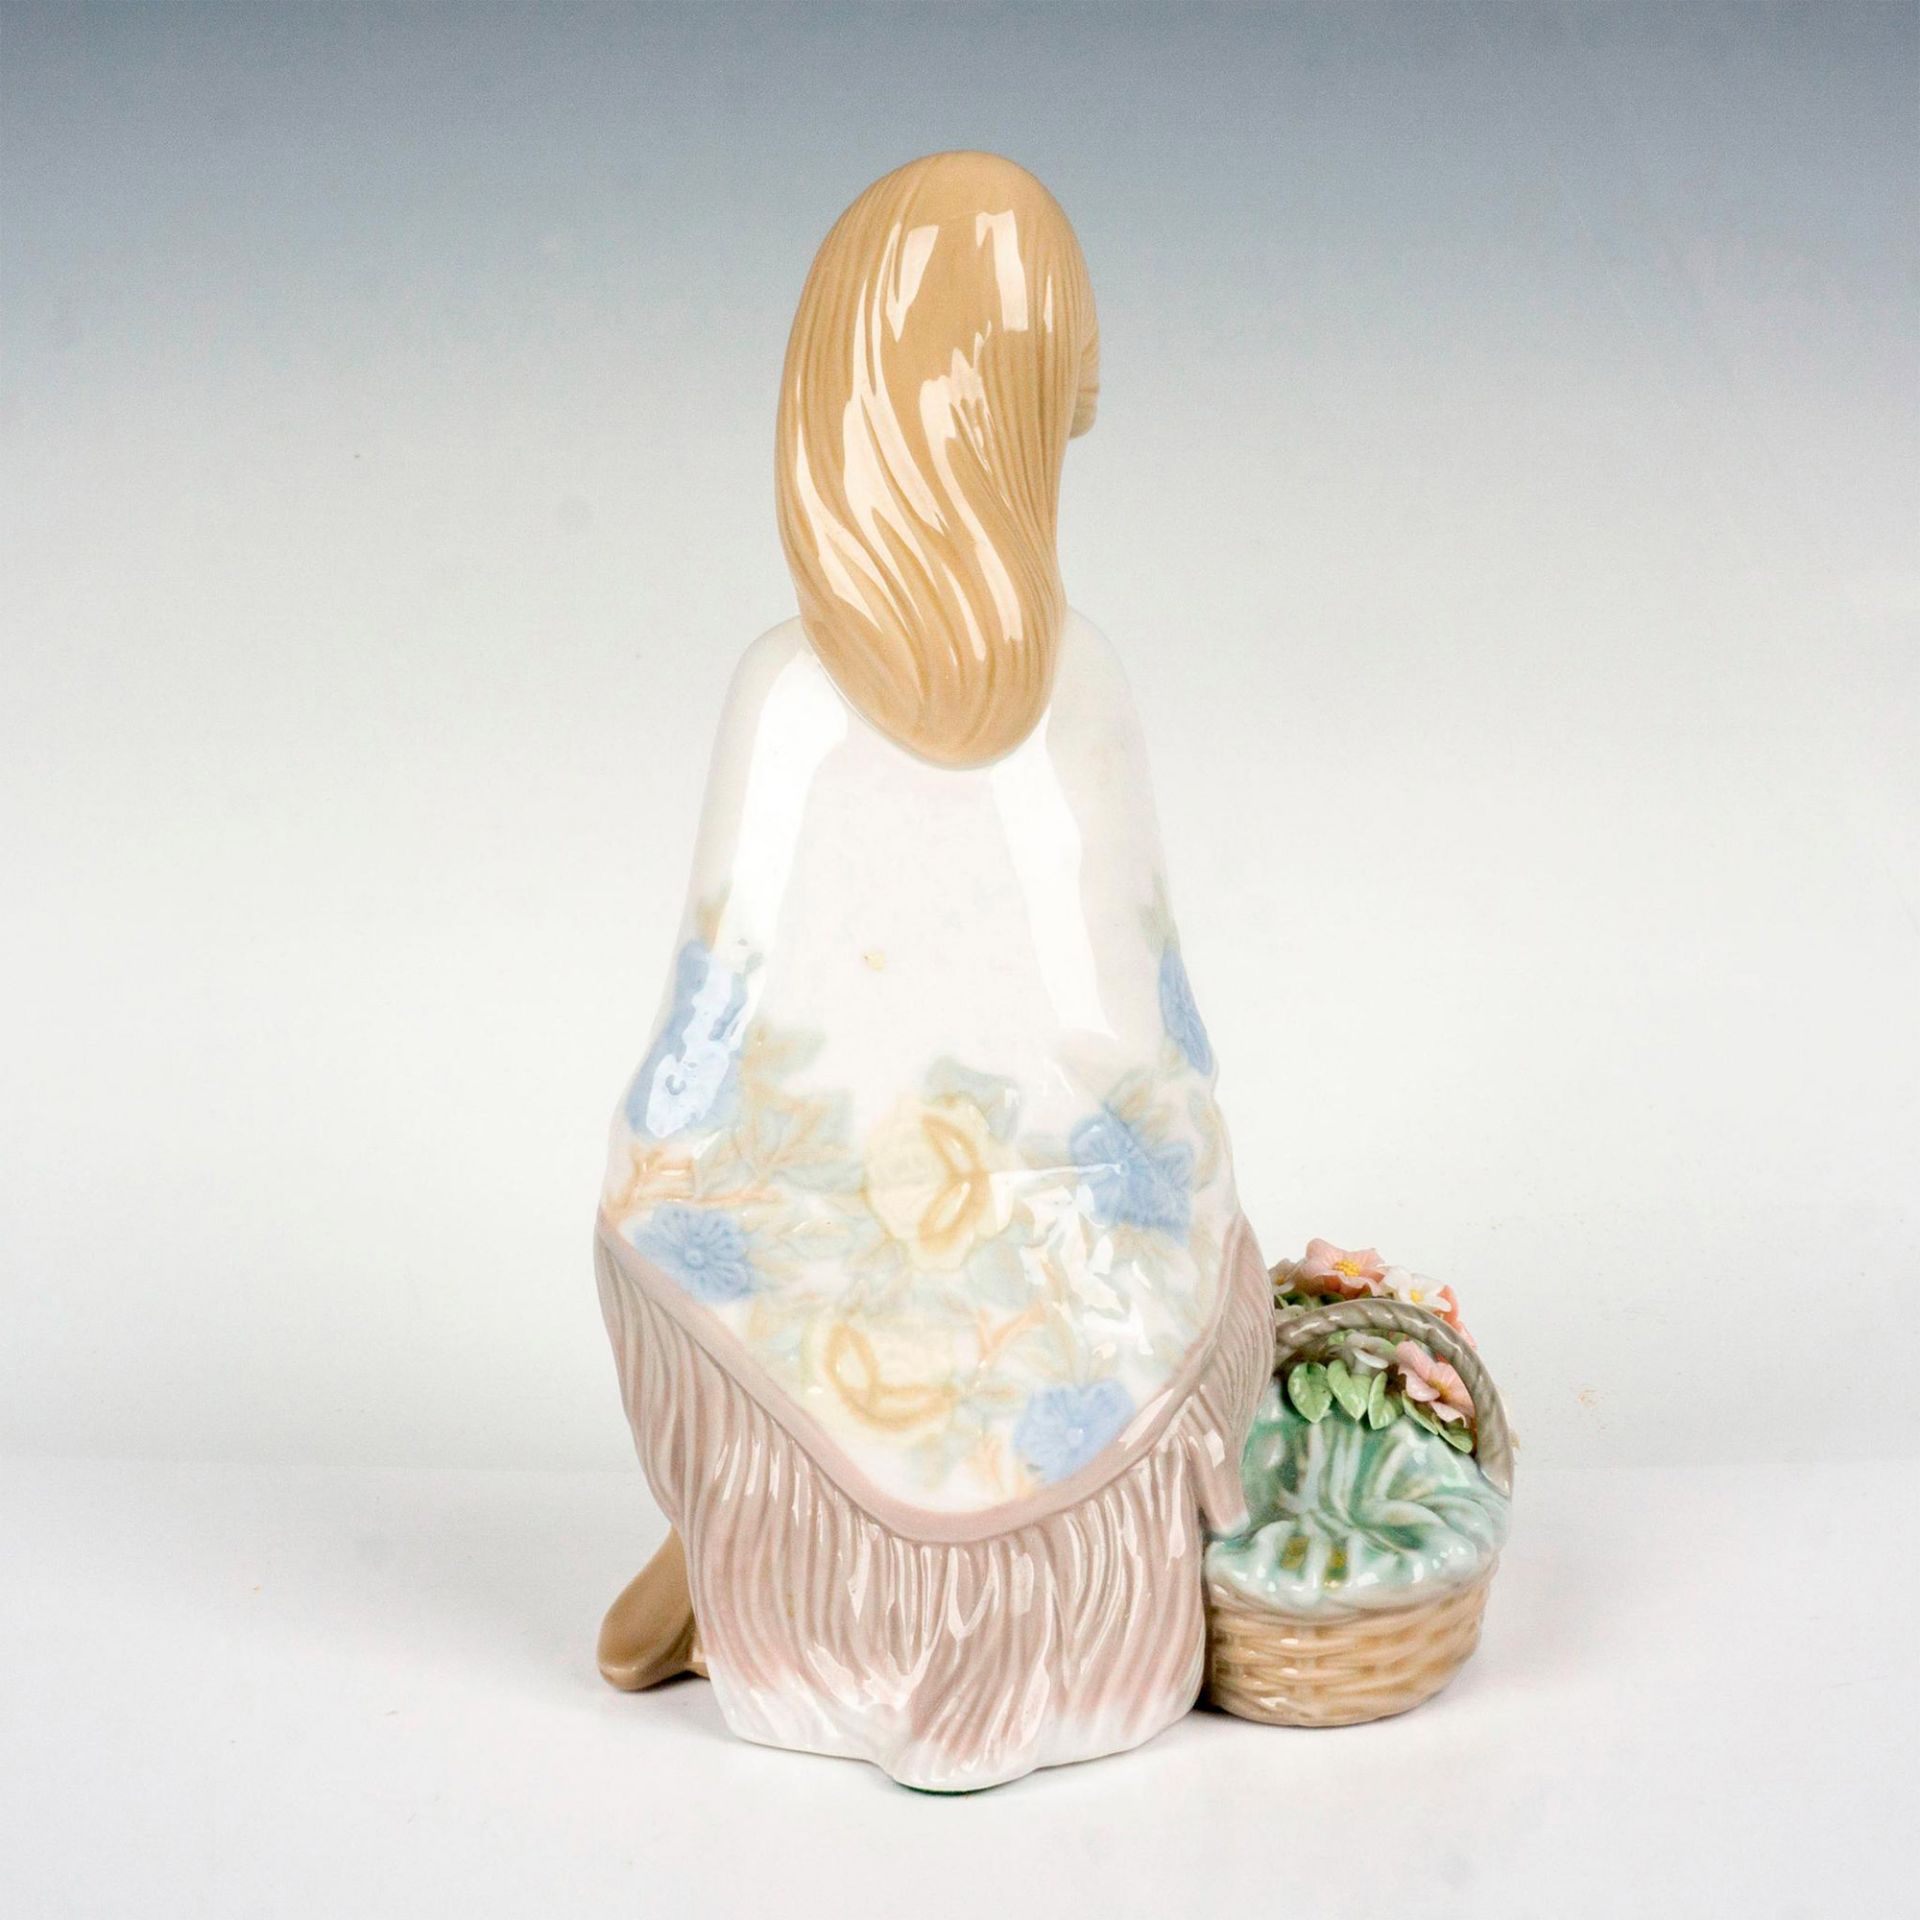 Flower Song 1007607 - Lladro Figurine - Image 2 of 4